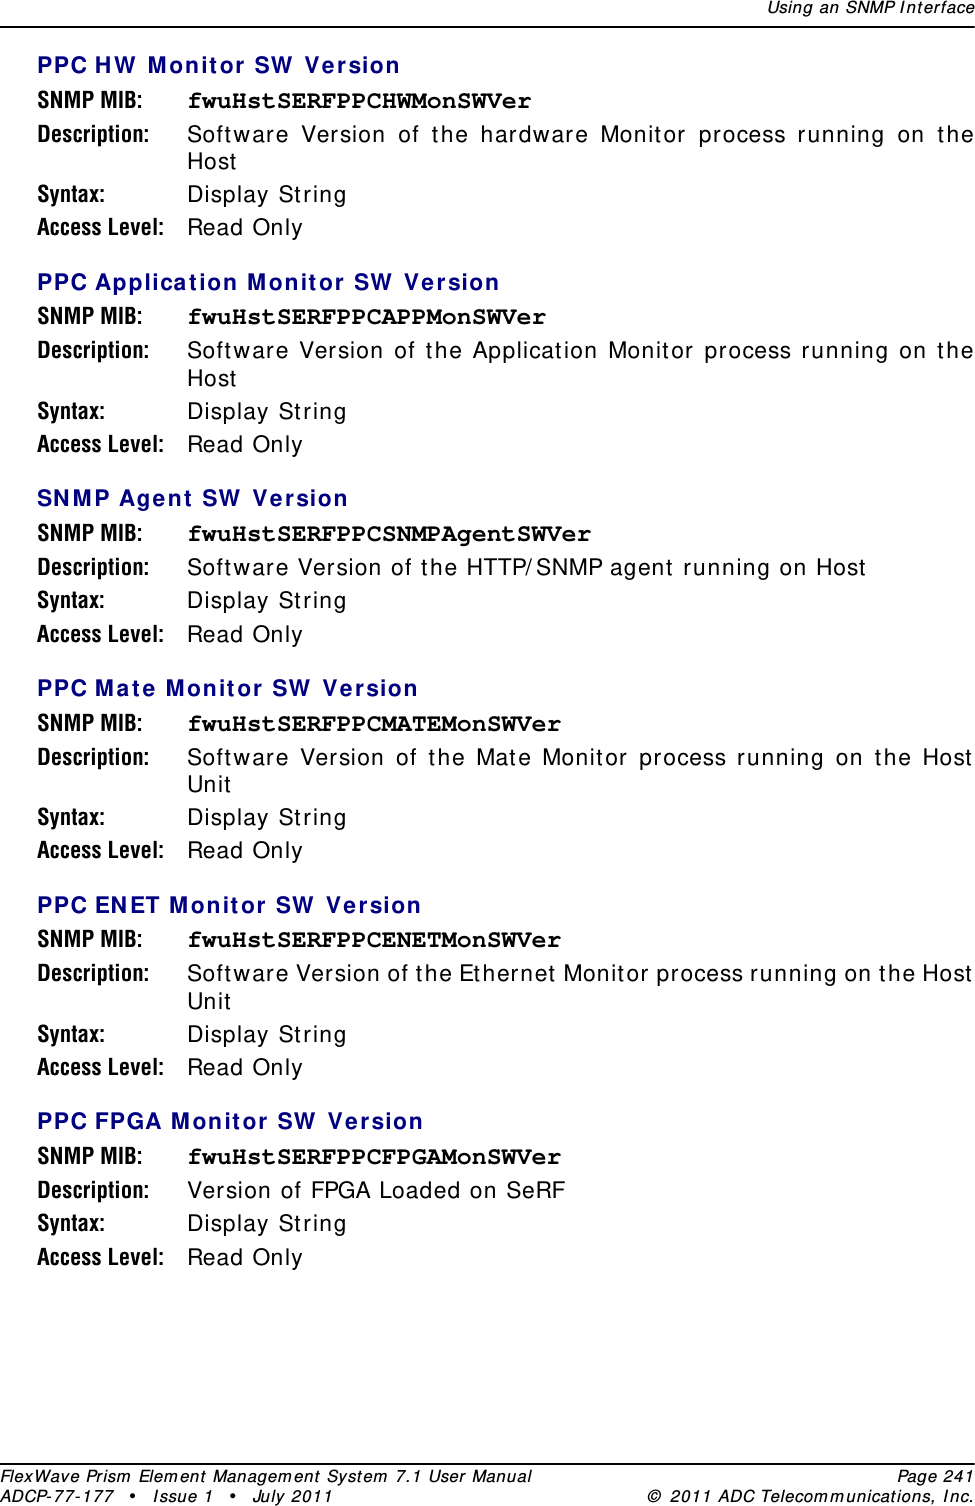 Using an SNMP I nt erfaceFlexWave Prism  Elem ent Managem ent  Syst em  7.1 User Manual Page 241ADCP- 77- 177  • I ssue 1 • July 2011 ©  2011 ADC Telecom m unicat ions, I nc.PPC H W  Mon it or SW  Ver sionSNMP MIB: fwuHstSERFPPCHWMonSWVerDescription: Soft ware Version of the hardware Monit or process running on t he HostSyntax: Display StringAccess Level: Read OnlyPPC Application Monit or SW  VersionSNMP MIB: fwuHstSERFPPCAPPMonSWVerDescription: Soft ware Version of the Applicat ion Monit or process running on t he HostSyntax: Display StringAccess Level: Read OnlySN M P Agent  SW  VersionSNMP MIB: fwuHstSERFPPCSNMPAgentSWVerDescription: Soft ware Version of the HTTP/ SNMP agent  running on HostSyntax: Display StringAccess Level: Read OnlyPPC M ate Monit or SW  VersionSNMP MIB: fwuHstSERFPPCMATEMonSWVerDescription: Soft ware Version of the Mat e Monit or process running on the HostUnitSyntax: Display StringAccess Level: Read OnlyPPC EN ET Monit or SW  VersionSNMP MIB: fwuHstSERFPPCENETMonSWVerDescription: Soft ware Version of the Ethernet  Monitor process running on the HostUnitSyntax: Display StringAccess Level: Read OnlyPPC FPGA M onit or SW  VersionSNMP MIB: fwuHstSERFPPCFPGAMonSWVerDescription: Version of FPGA Loaded on SeRFSyntax: Display StringAccess Level: Read Only